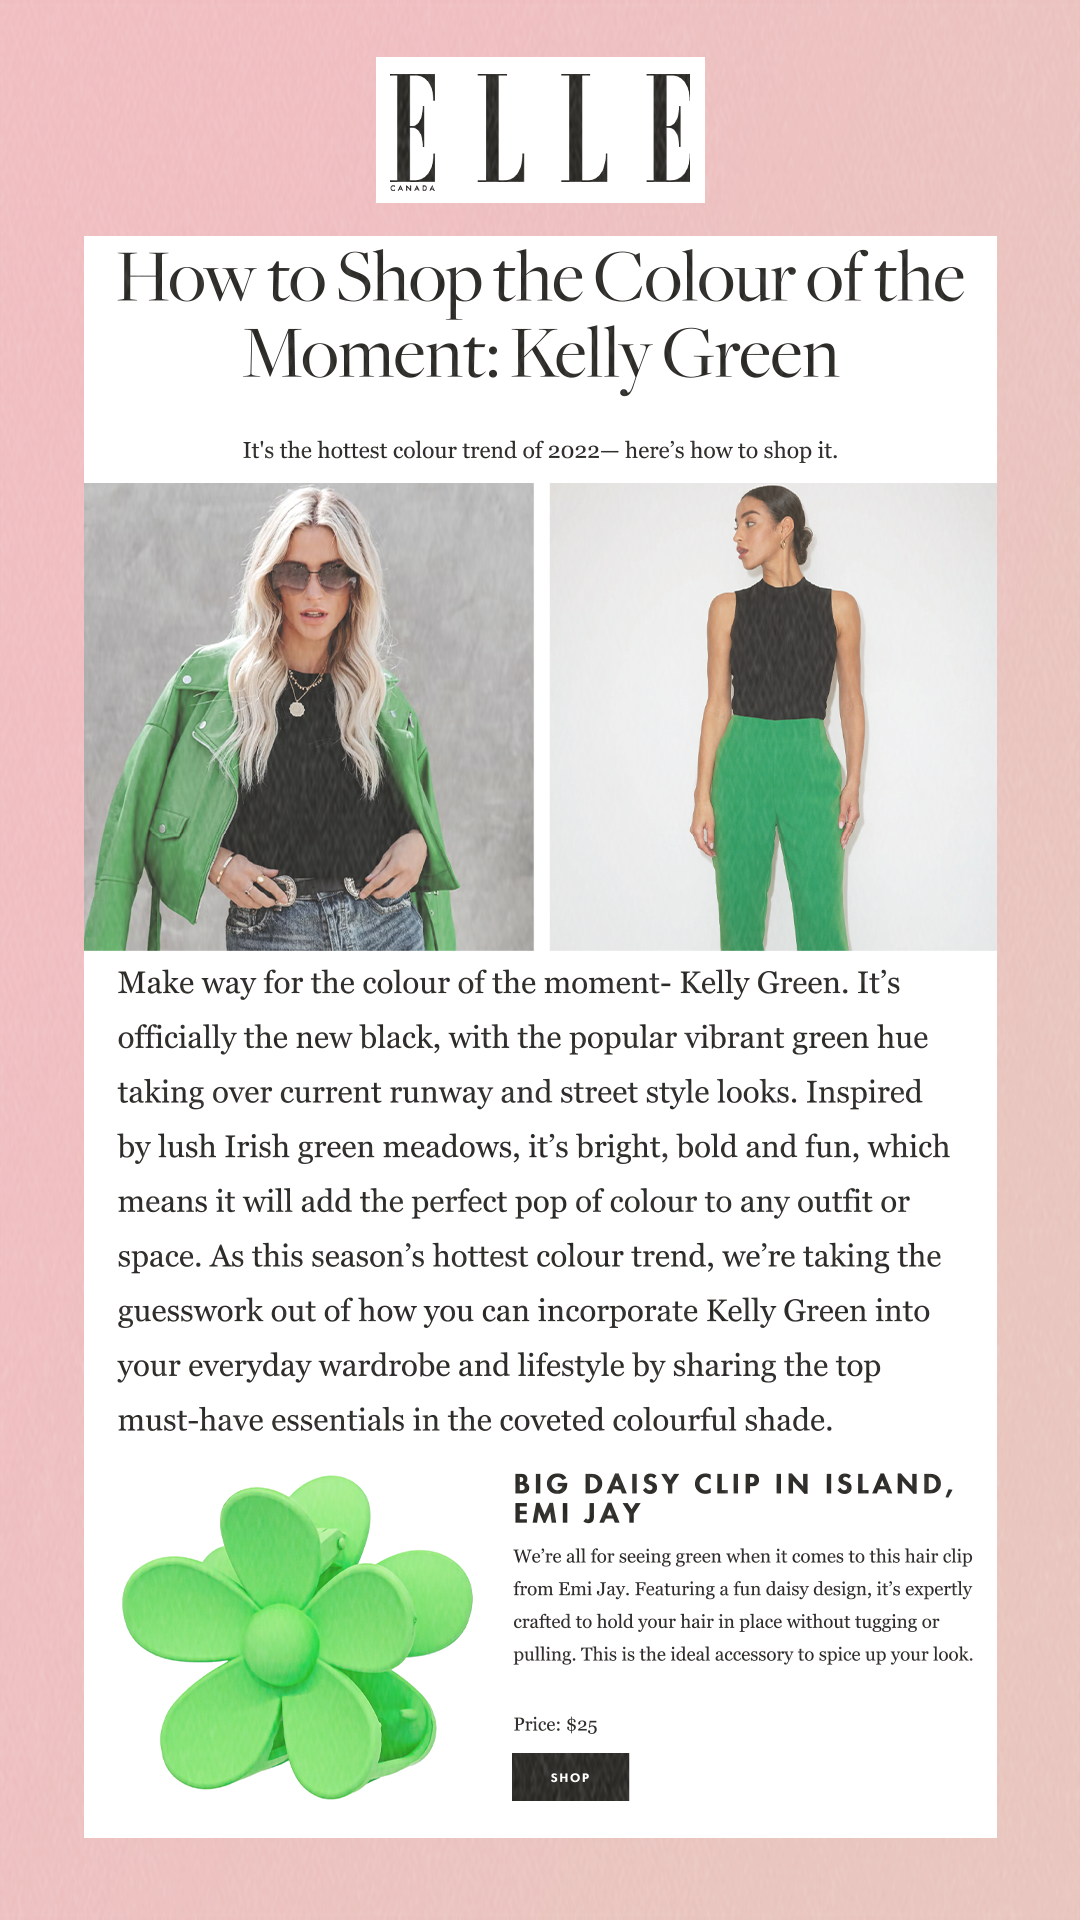 How to Shop the Colour of the Moment: Kelly Green It's the hottest colour trend of 2022— here’s how to shop it. Make way for the colour of the moment- Kelly Green. It’s officially the new black, with the popular vibrant green hue taking over current runway and street style looks. Inspired by lush Irish green meadows, it’s bright, bold and fun, which means it will add the perfect pop of colour to any outfit or space. As this season’s hottest colour trend, we’re taking the guesswork out of how you can incorporate Kelly Green into your everyday wardrobe and lifestyle by sharing the top must-have essentials in the coveted colourful shade. Big Daisy Clip in Island, Emi Jay We’re all for seeing green when it comes to this hair clip from Emi Jay. Featuring a fun daisy design, it’s expertly crafted to hold your hair in place without tugging or pulling. This is the ideal accessory to spice up your look.